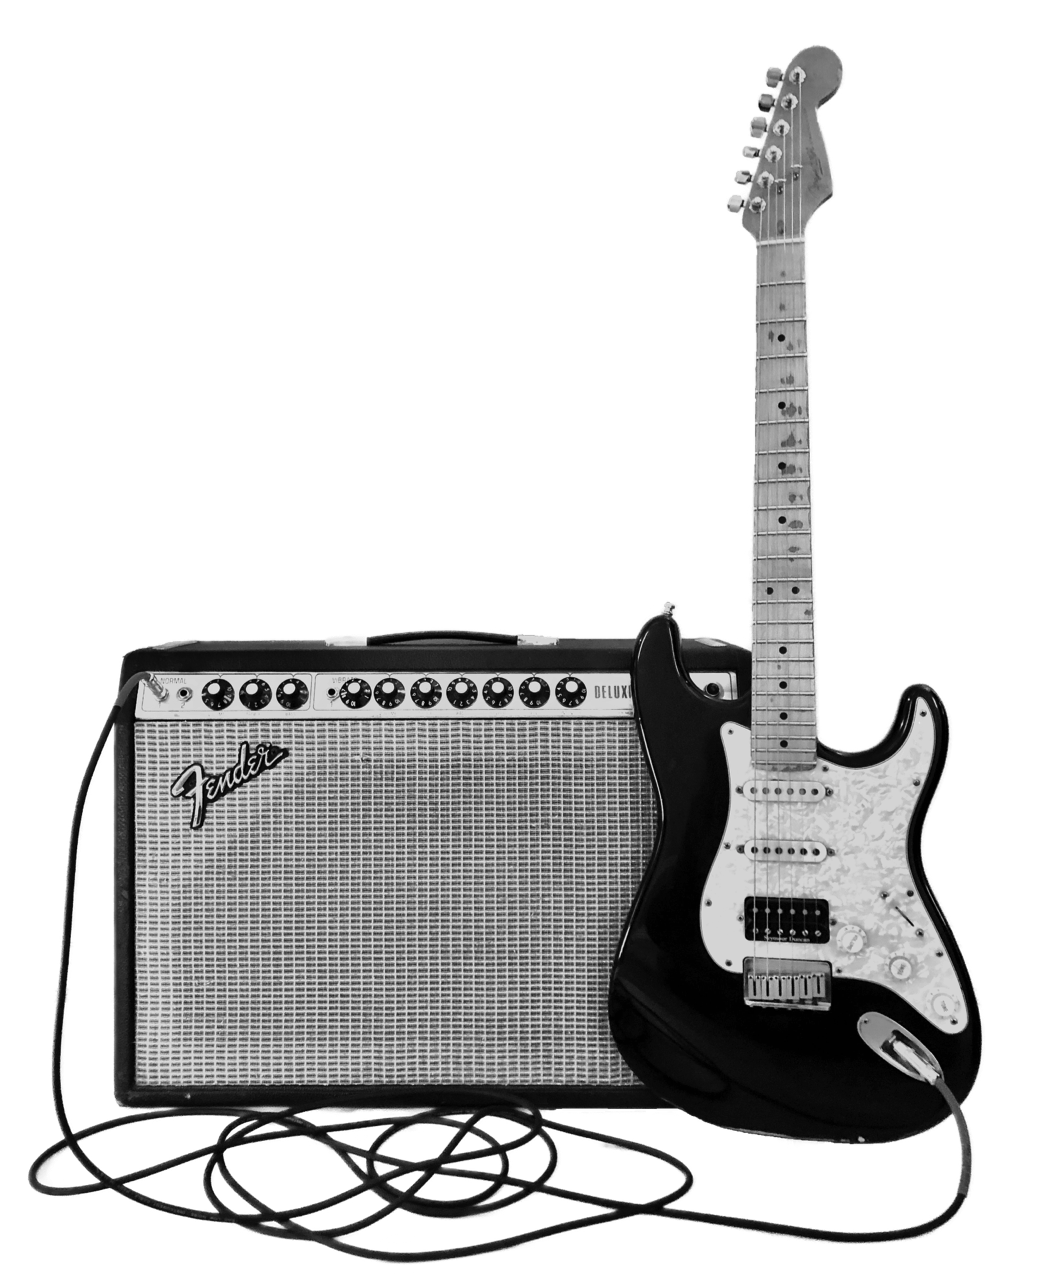 Fender Electric Guitar with Fender Amp